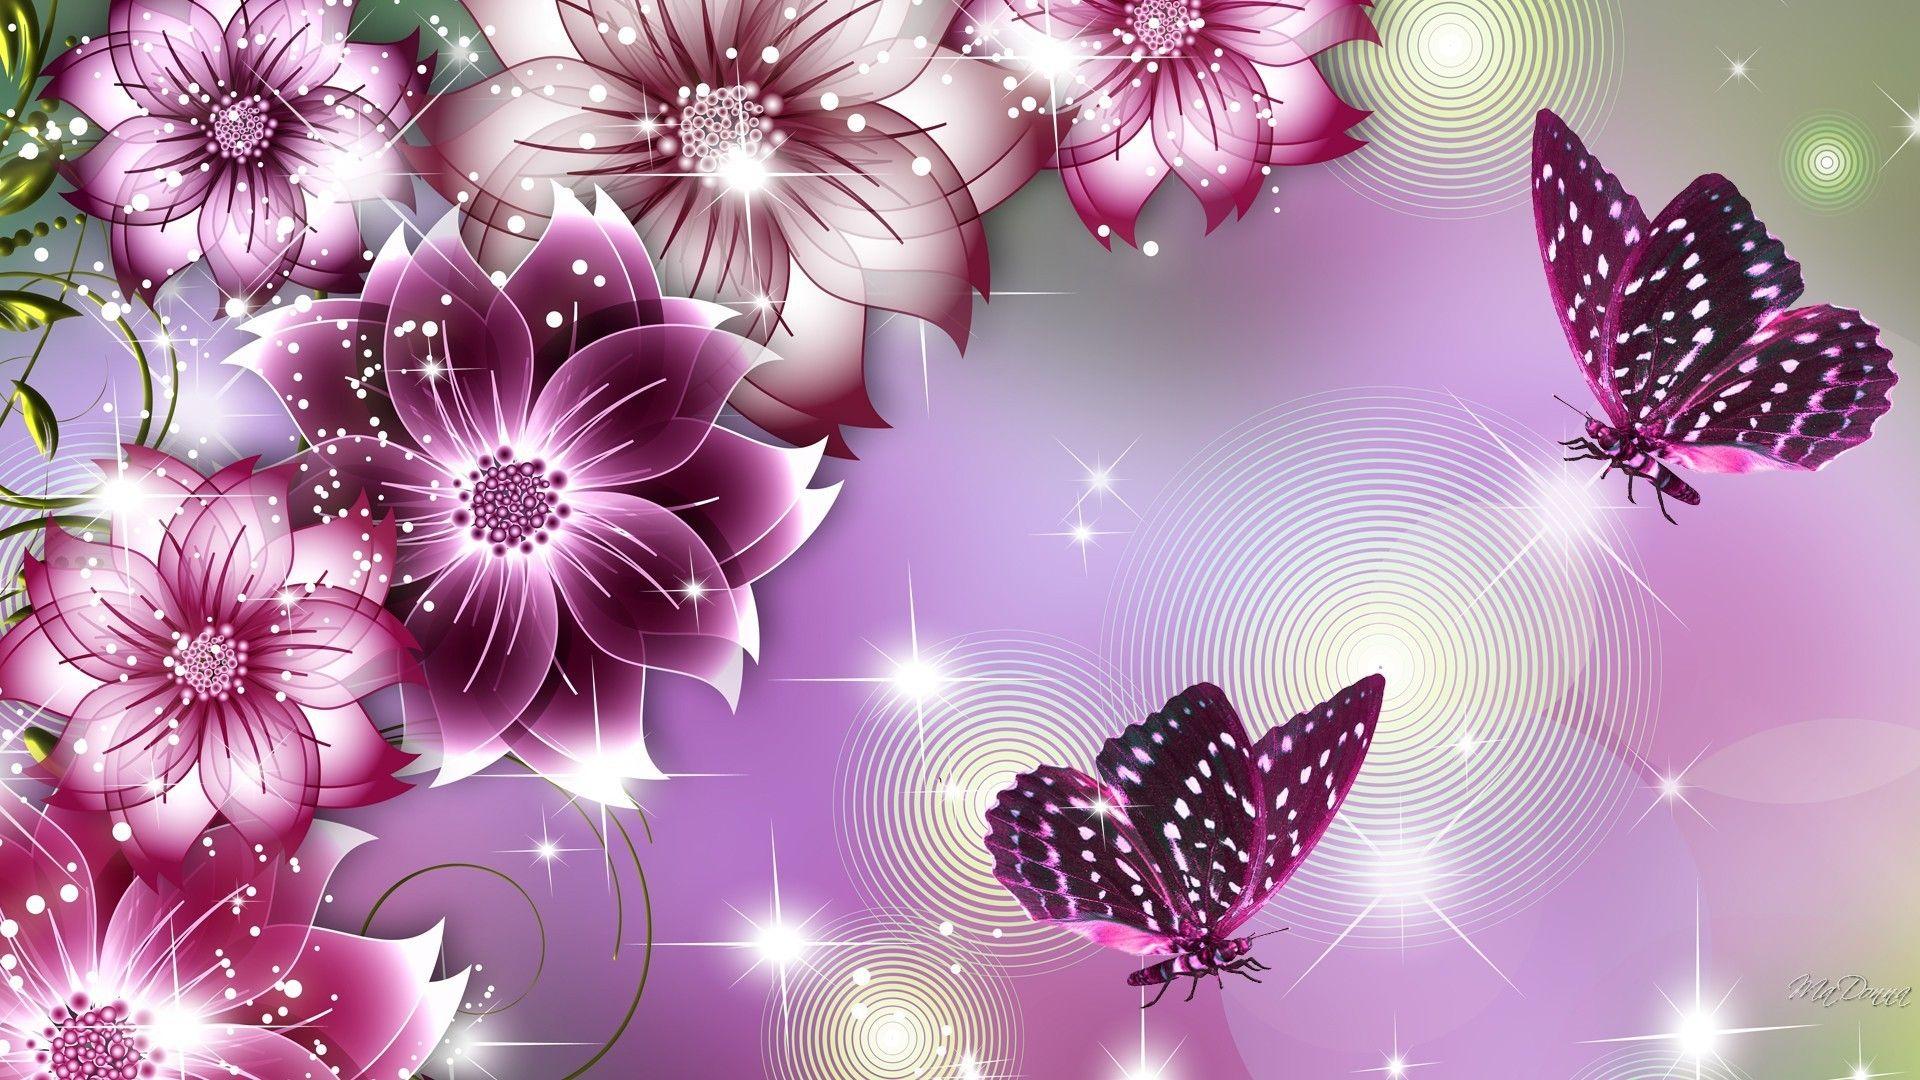 Flowers And Butterflies Wallpapers Top Free Flowers And Butterflies